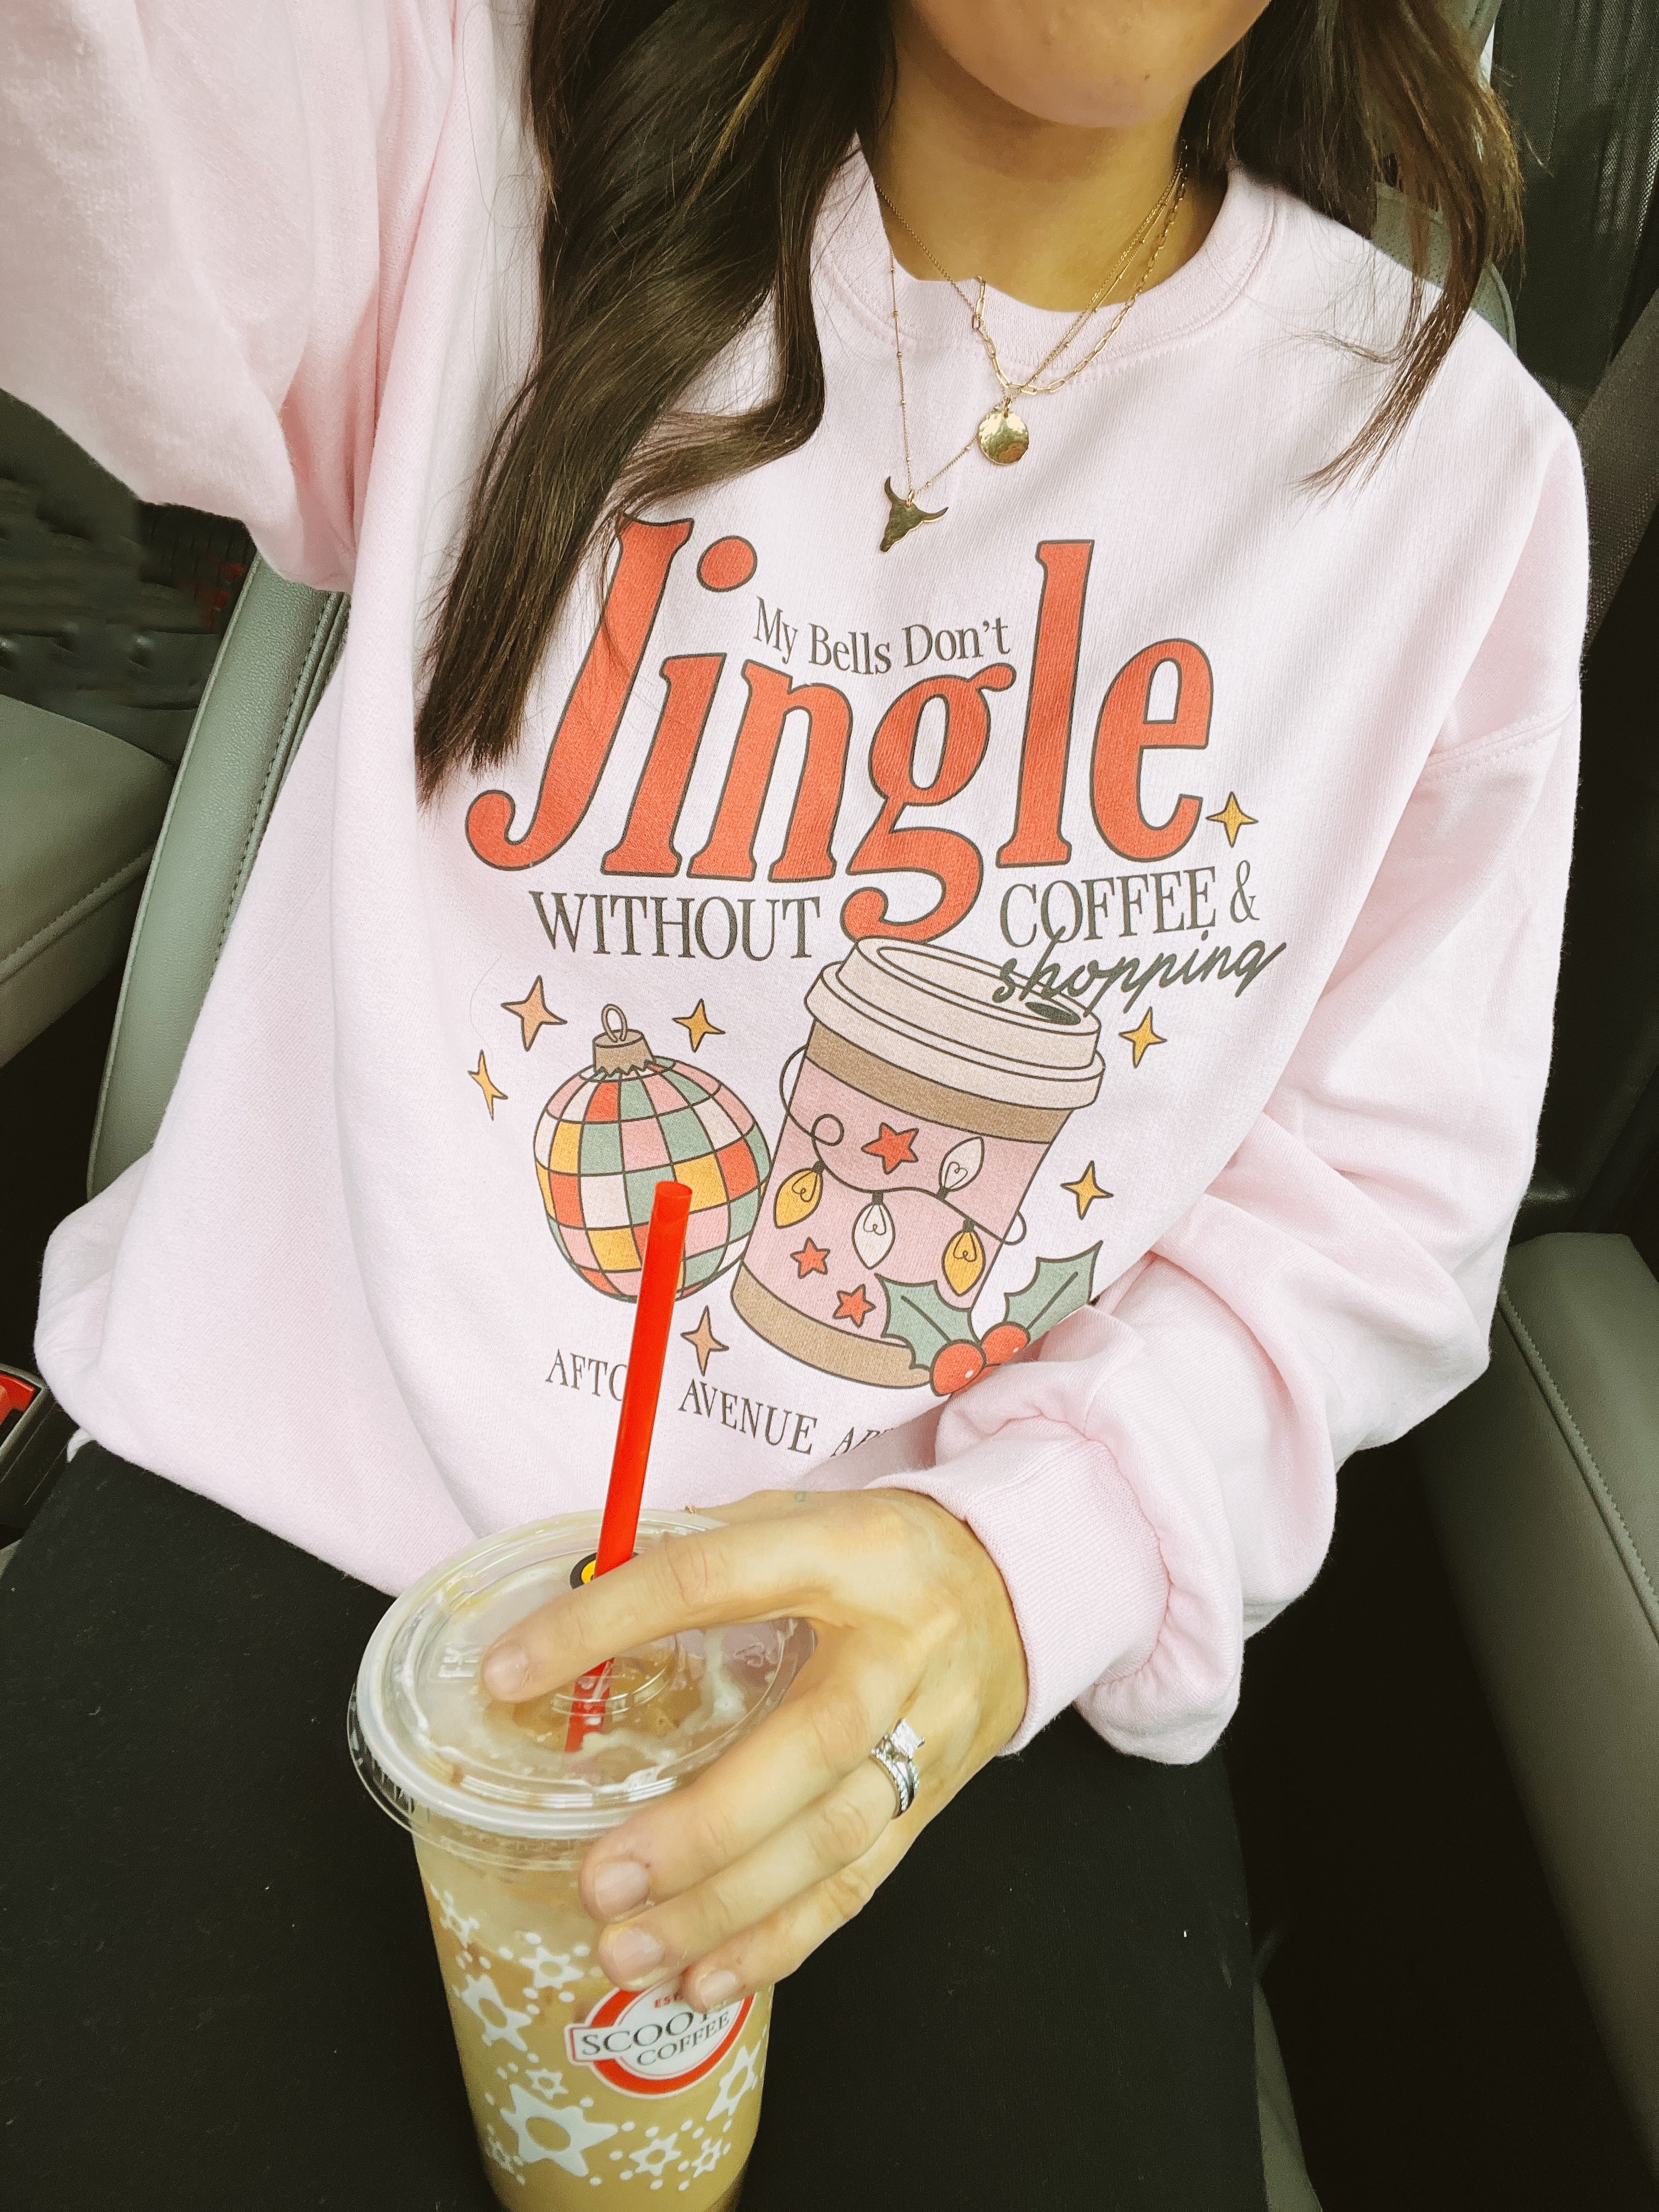 My Bells Don't Jingle Without Coffee & Shopping